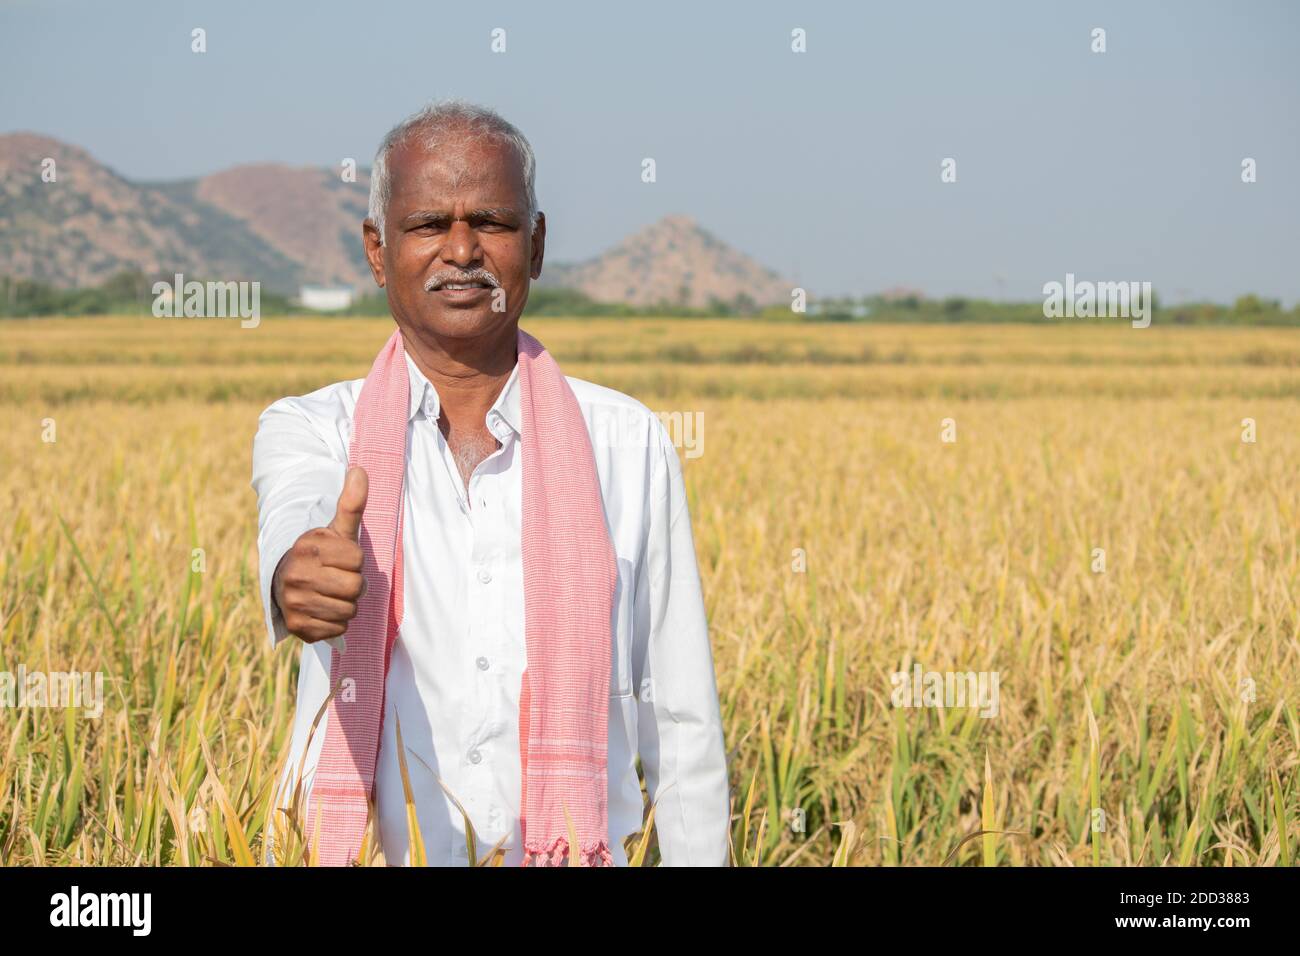 Indian Farmer with Thumps up gesture standing in middle of harvested Crops - concpet of good or bumper crop yields showing with copy space on Stock Photo